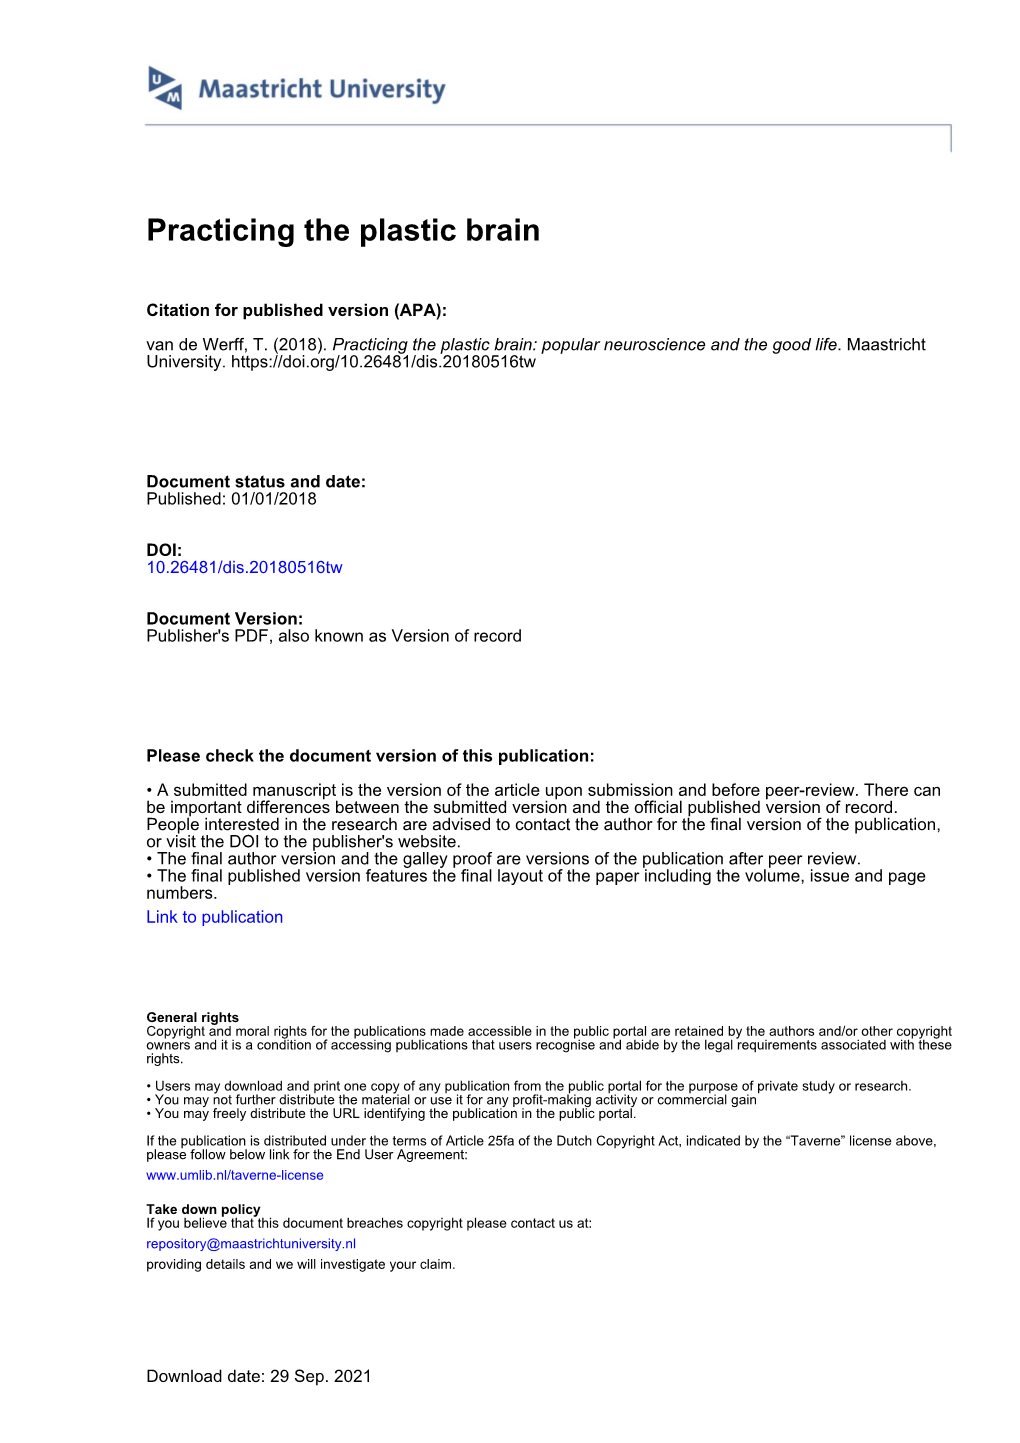 Practicing the Plastic Brain: Popular Neuroscience and the Good Life